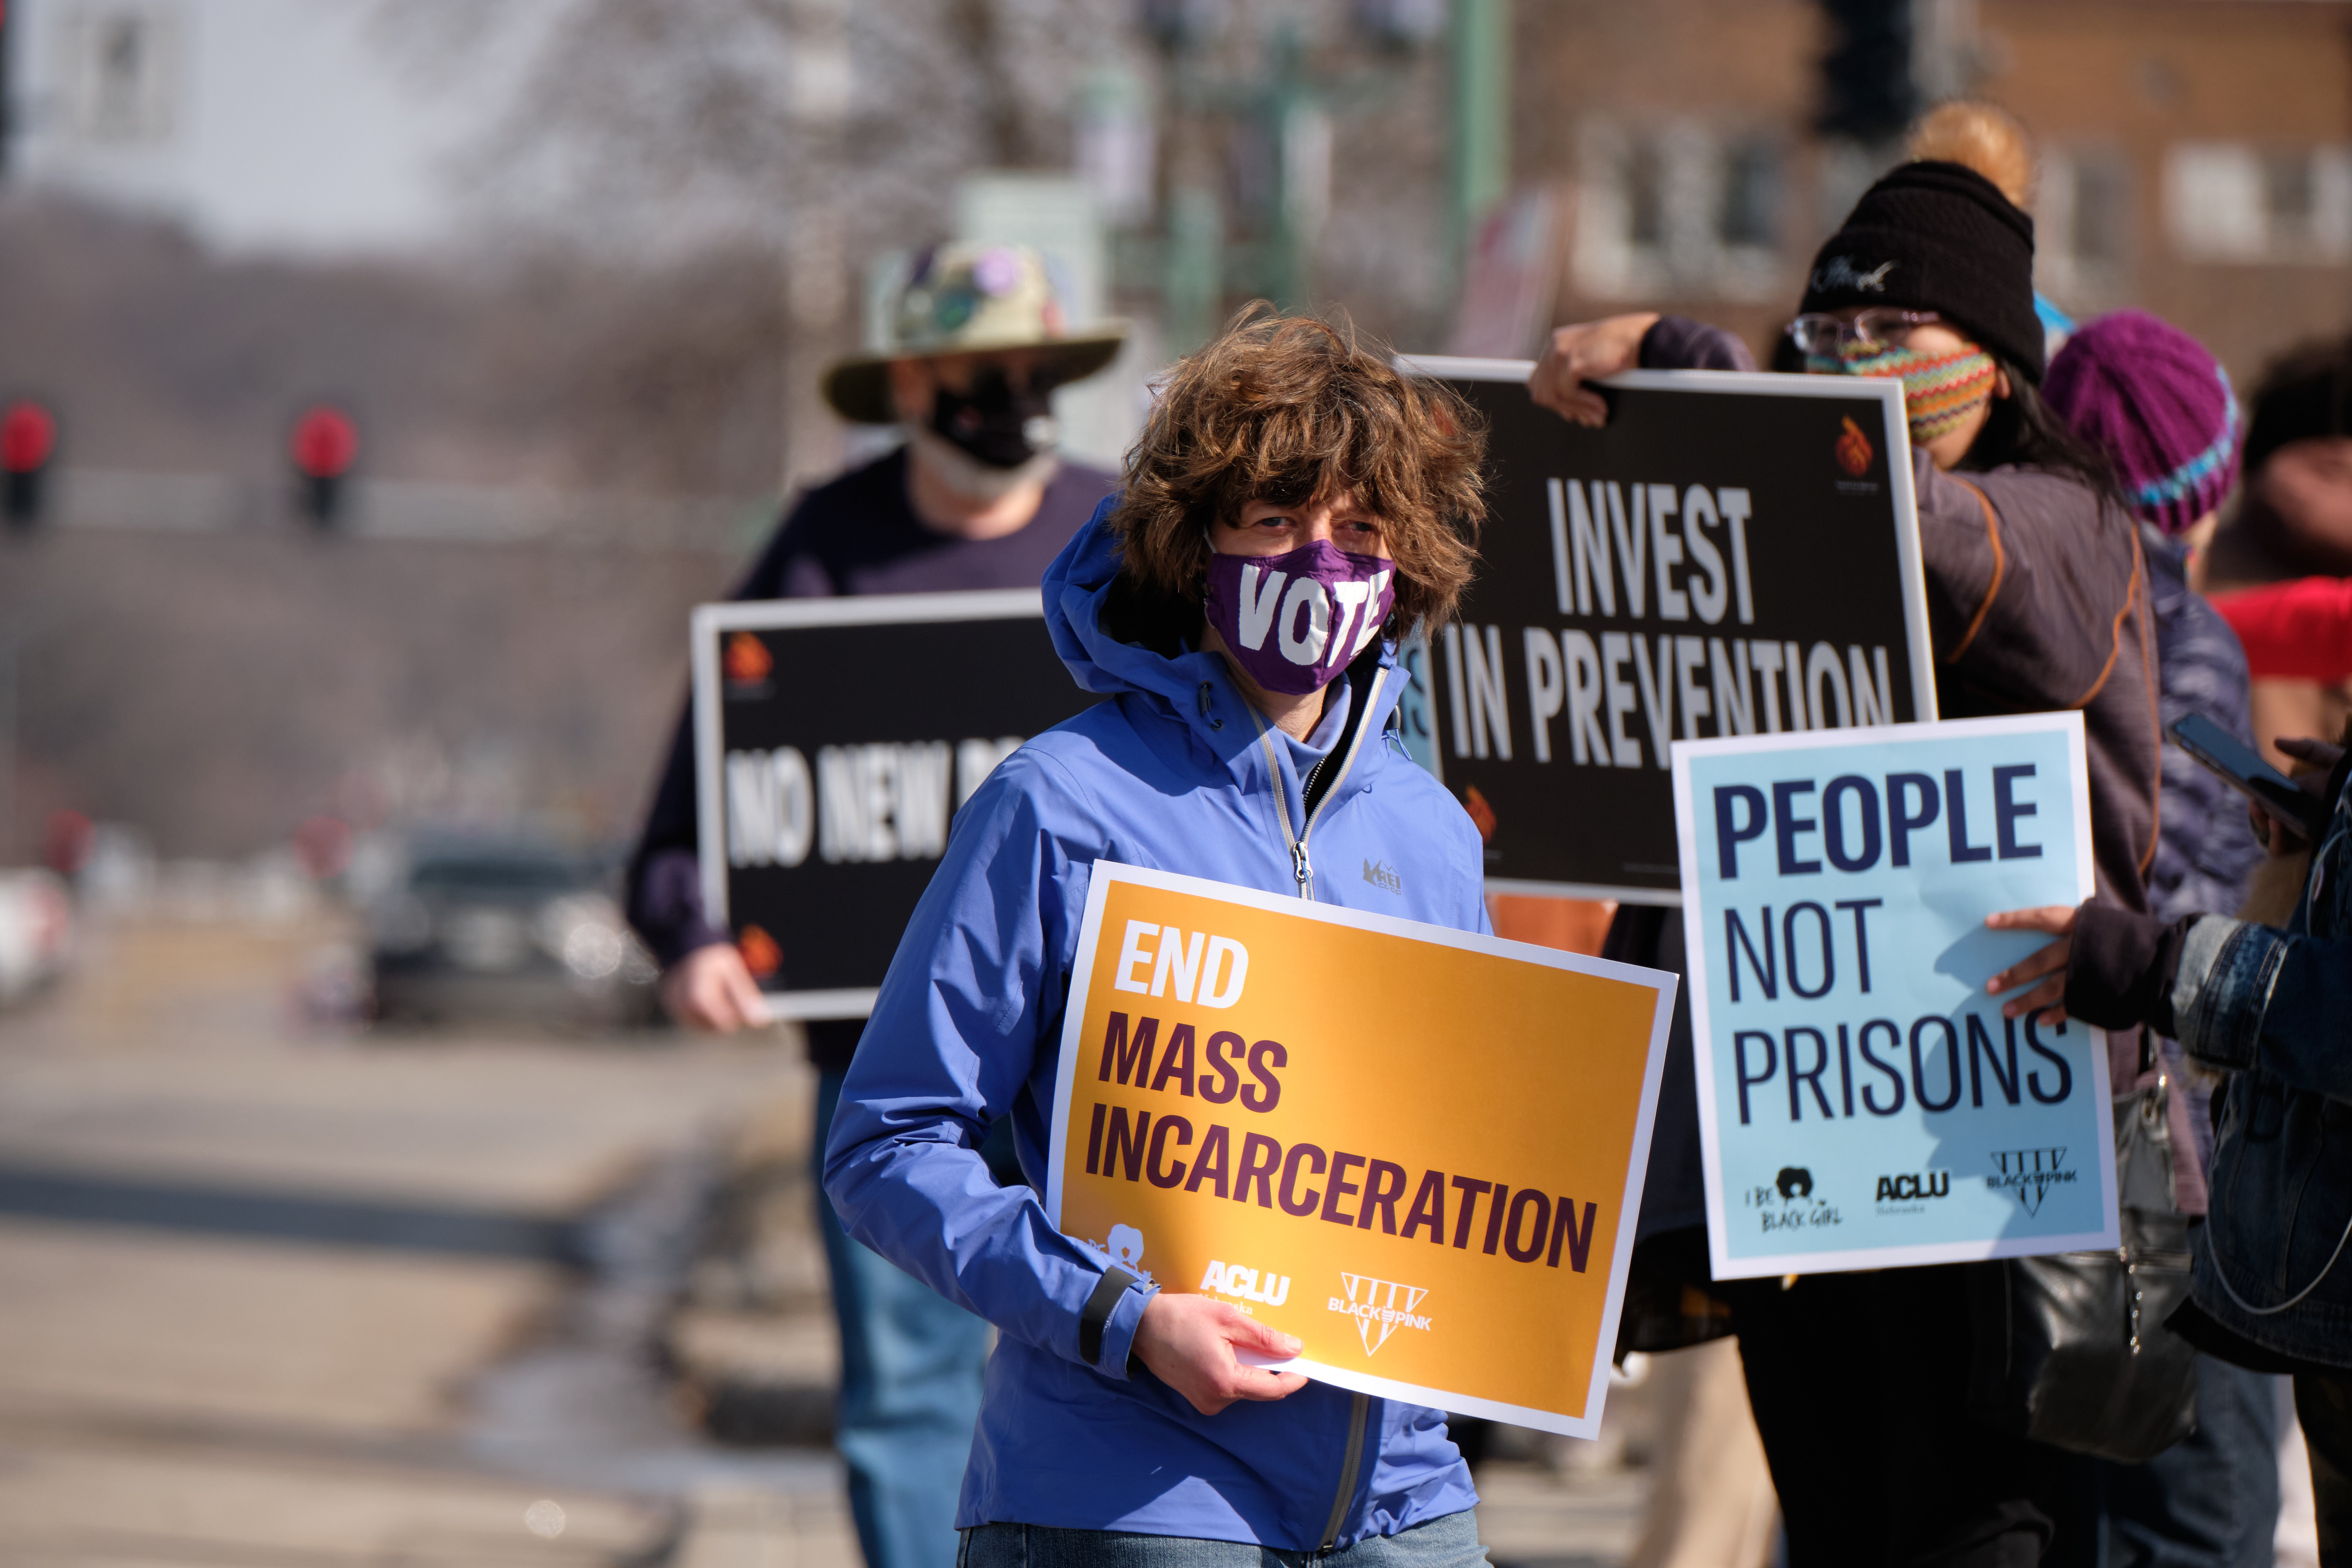 Protesters hold signs that read, "End Mass Incarceration," and "People Not Prisons."